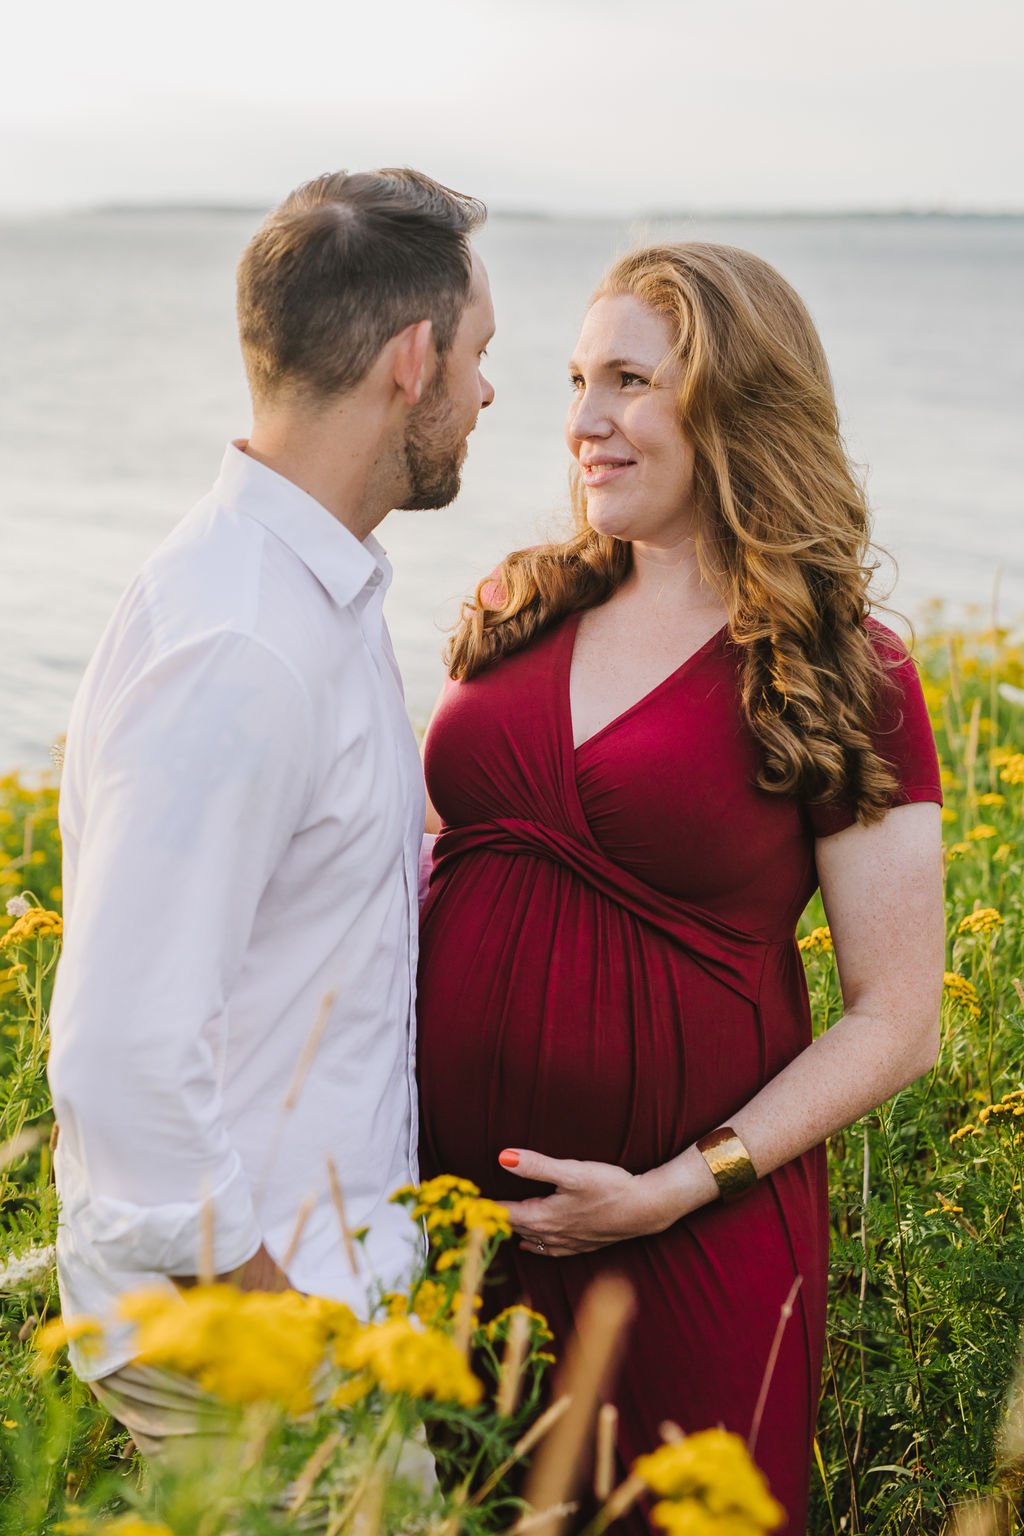 Claire+Jim-Maternity2021-Emily Tebbetts Photography-25Maternity portrait couples session south shore nut island quincy worlds end ocean beach seaside queer photographer.jpg